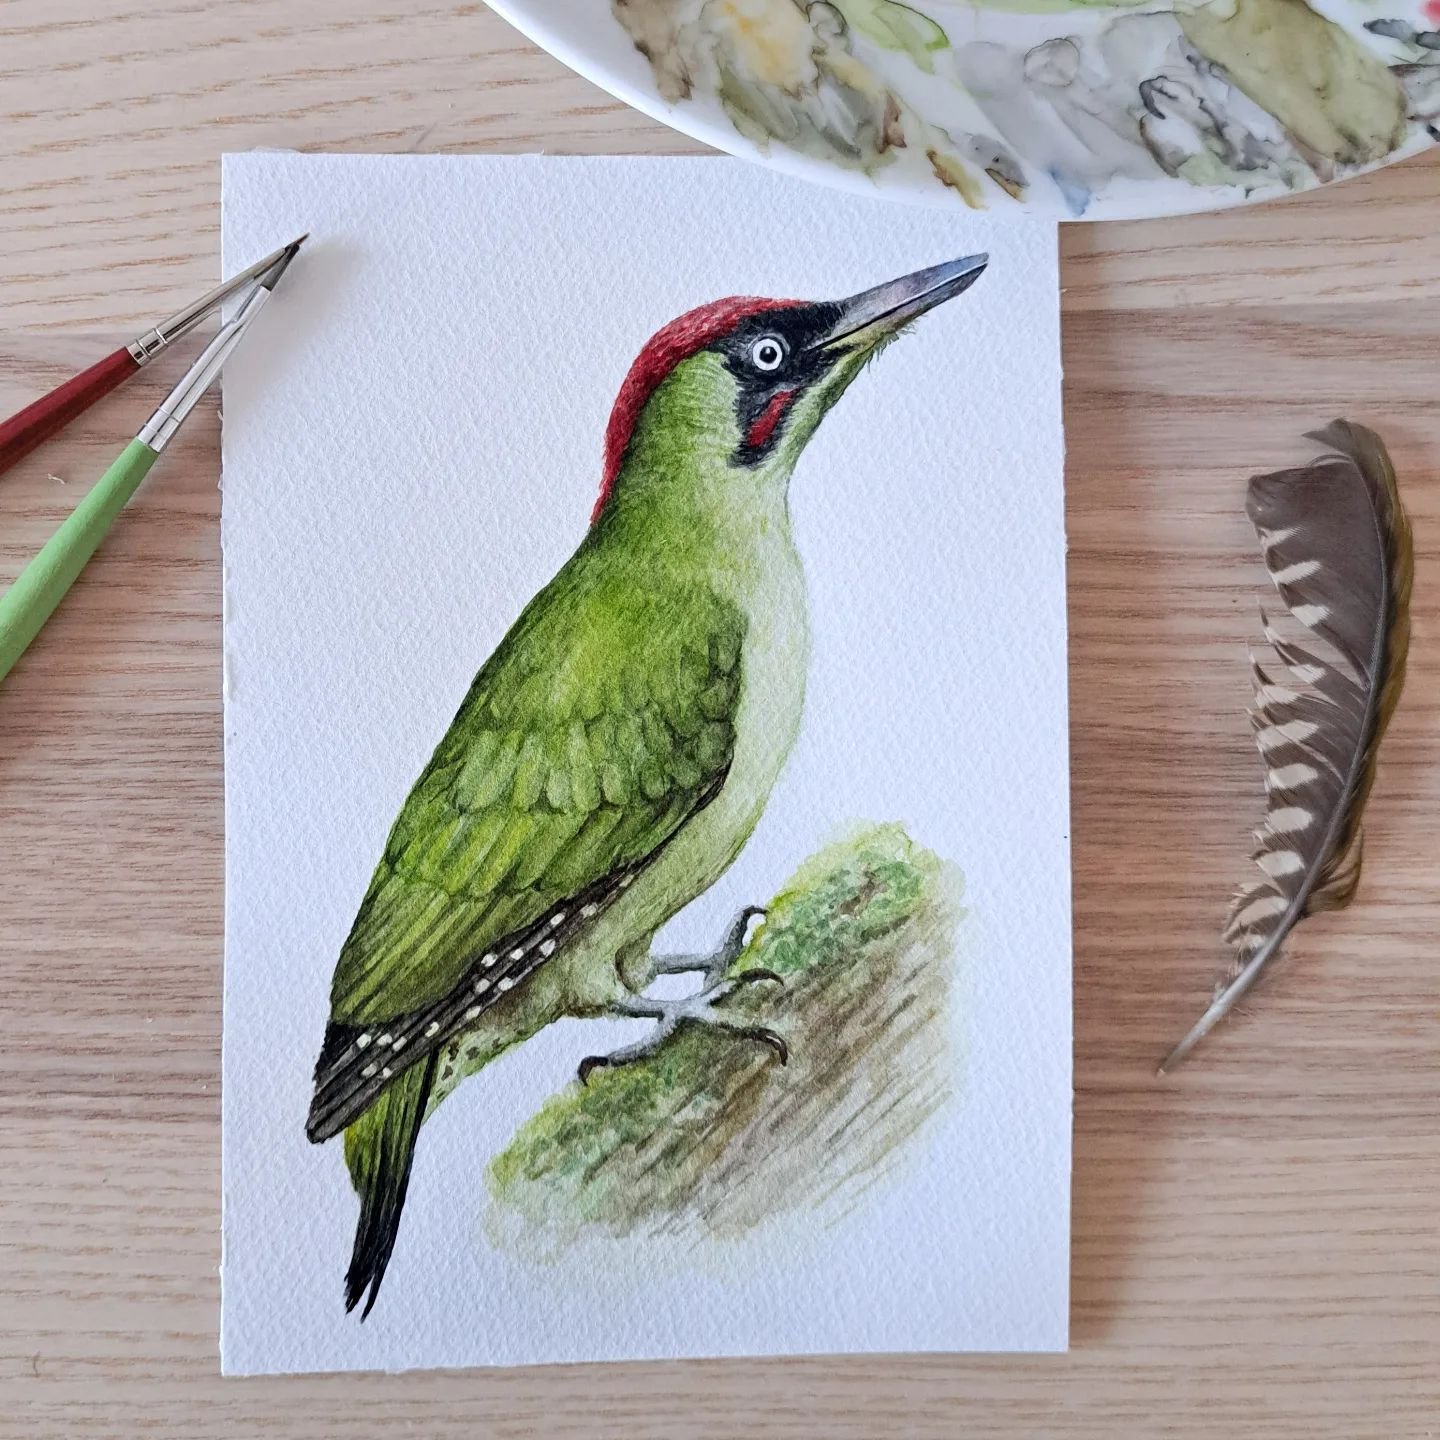 One of my most recent small paintings, an european green woodpecker.

I hear them a lot when I go for a walk in the woods because their call sounds like a loud laugh, very recognizable (you can listen to it in the music of this post), but it is very 